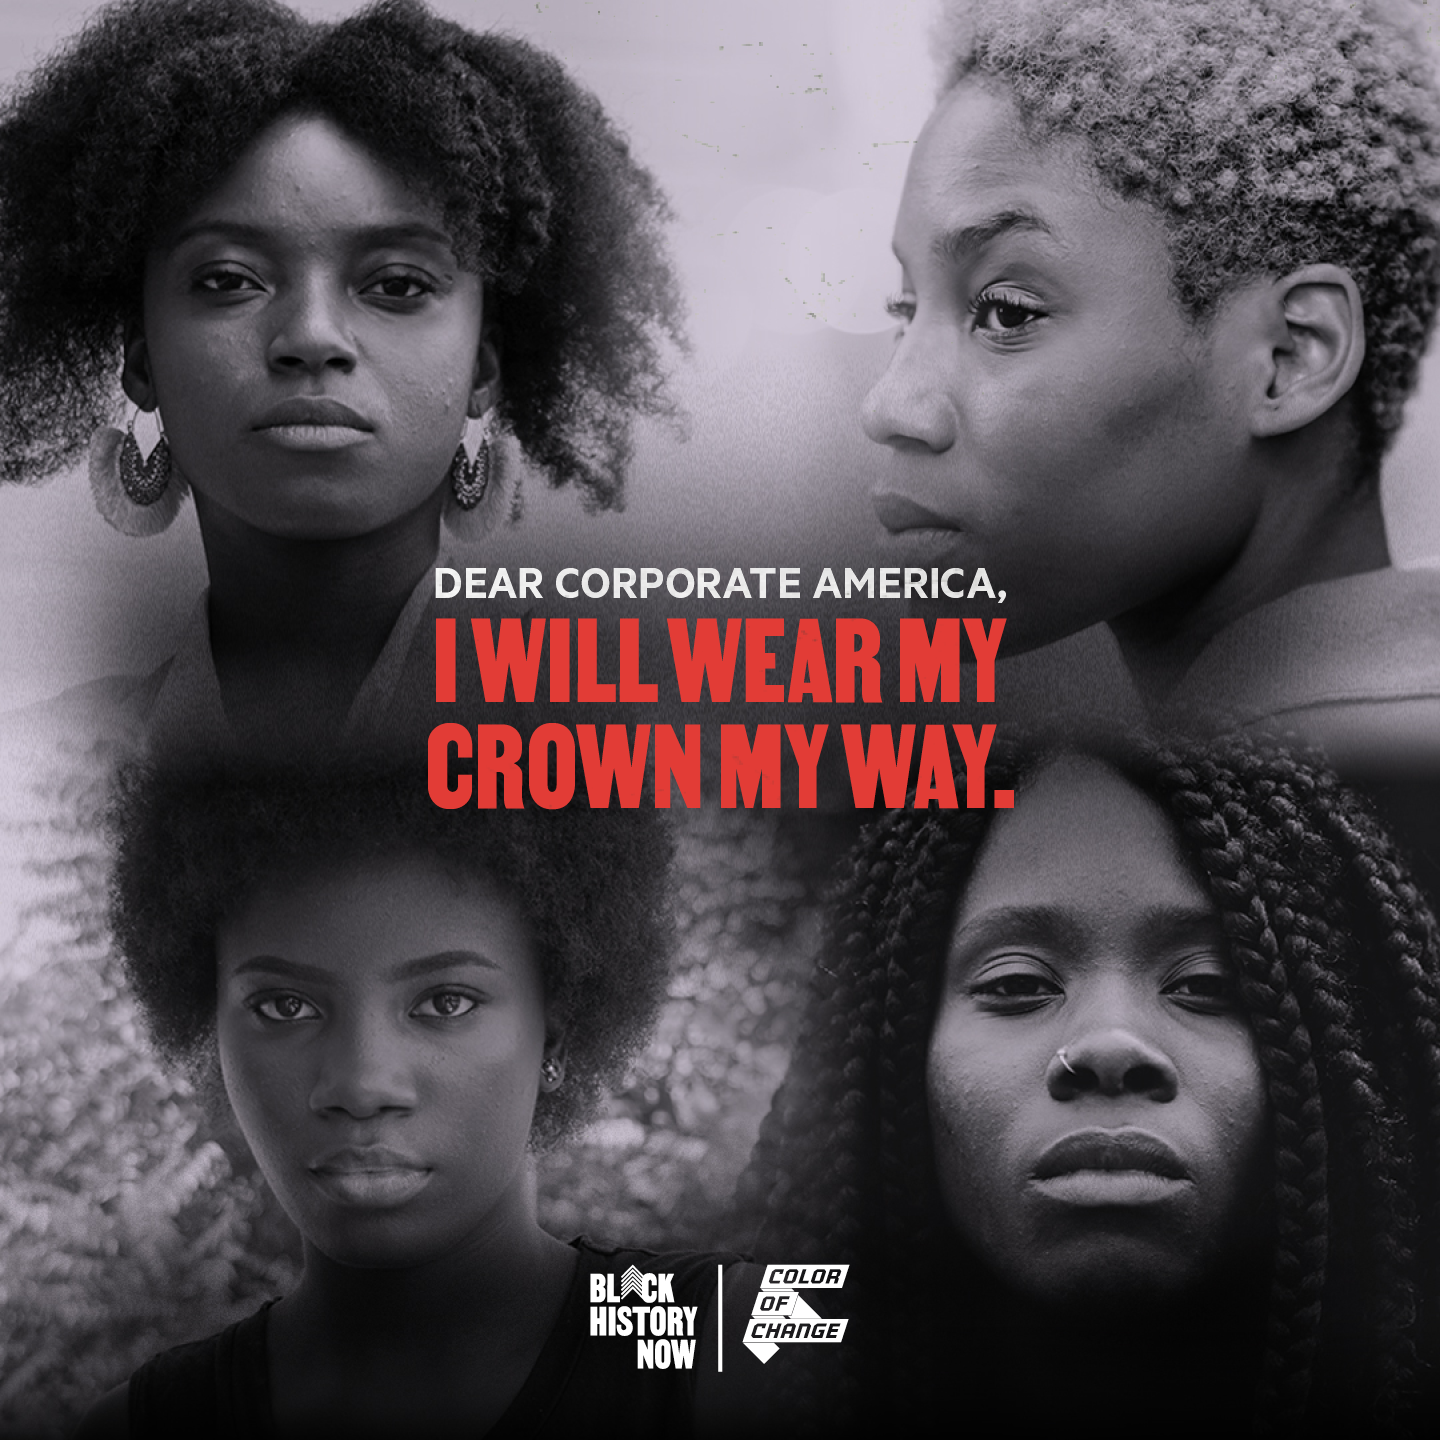 Demand that major corporations implement hair policies that protect Black  employees 